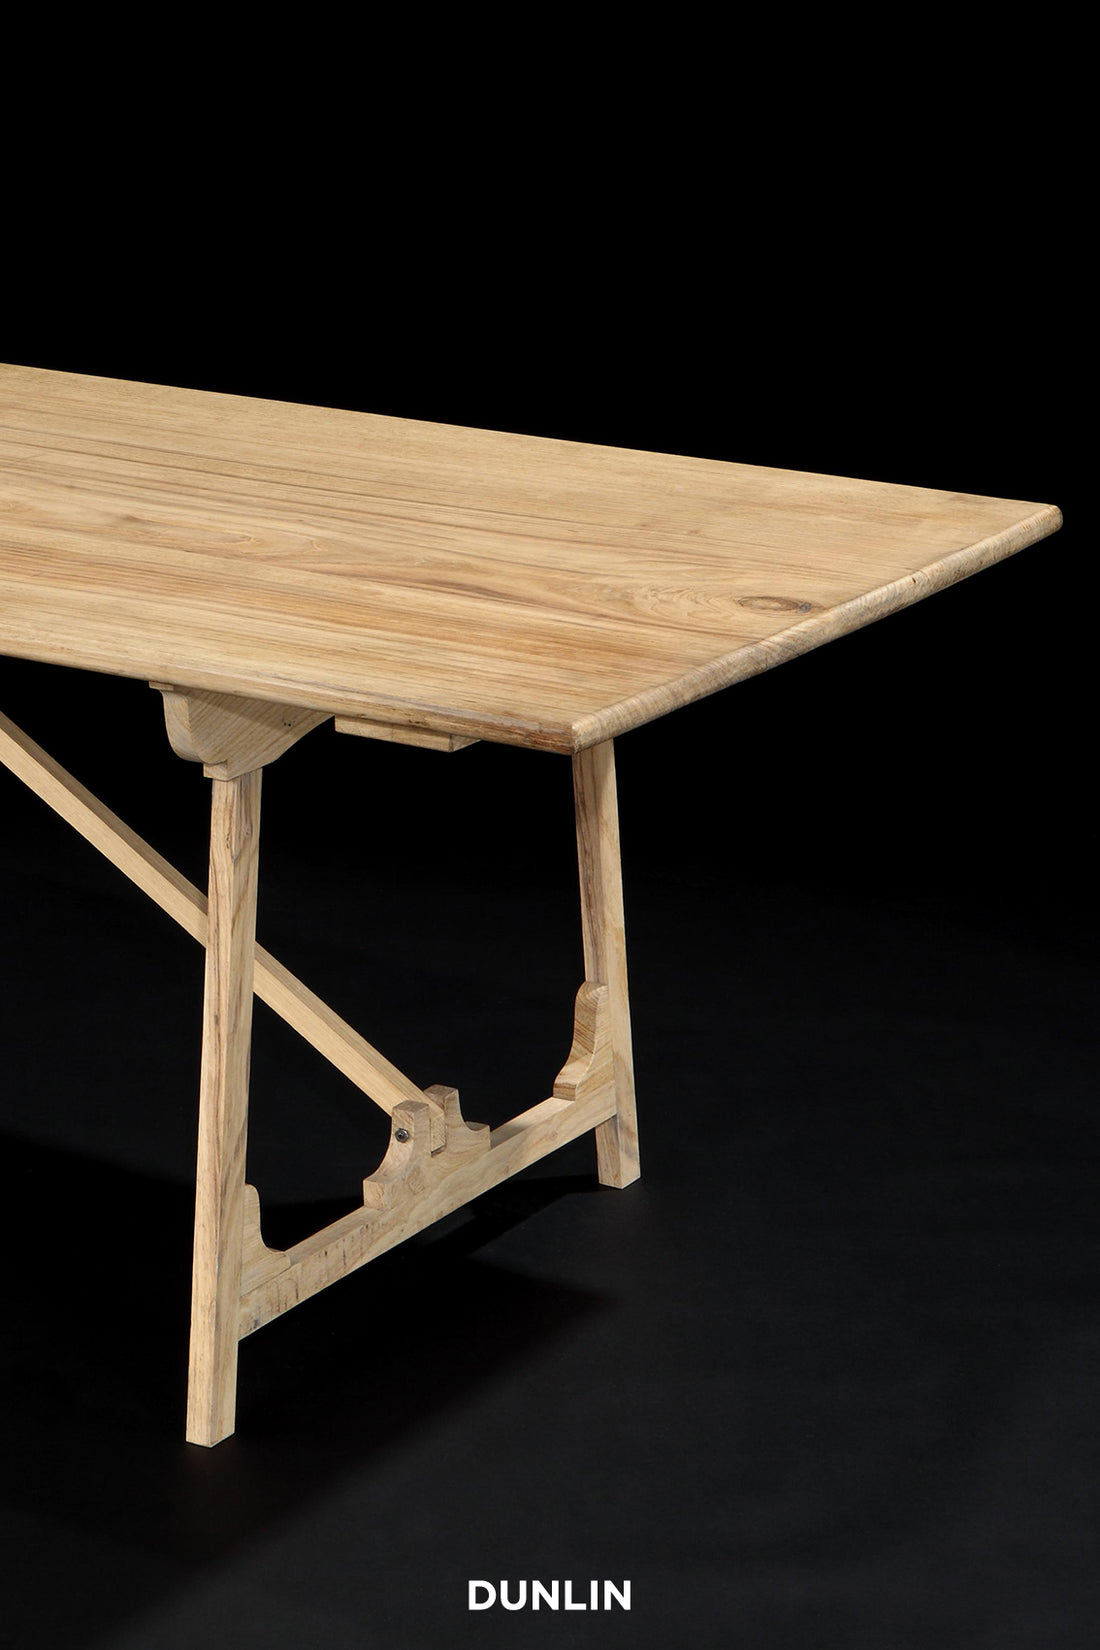 Rose Uniacke Folding 'Campaign' Refectory Table Dunlin